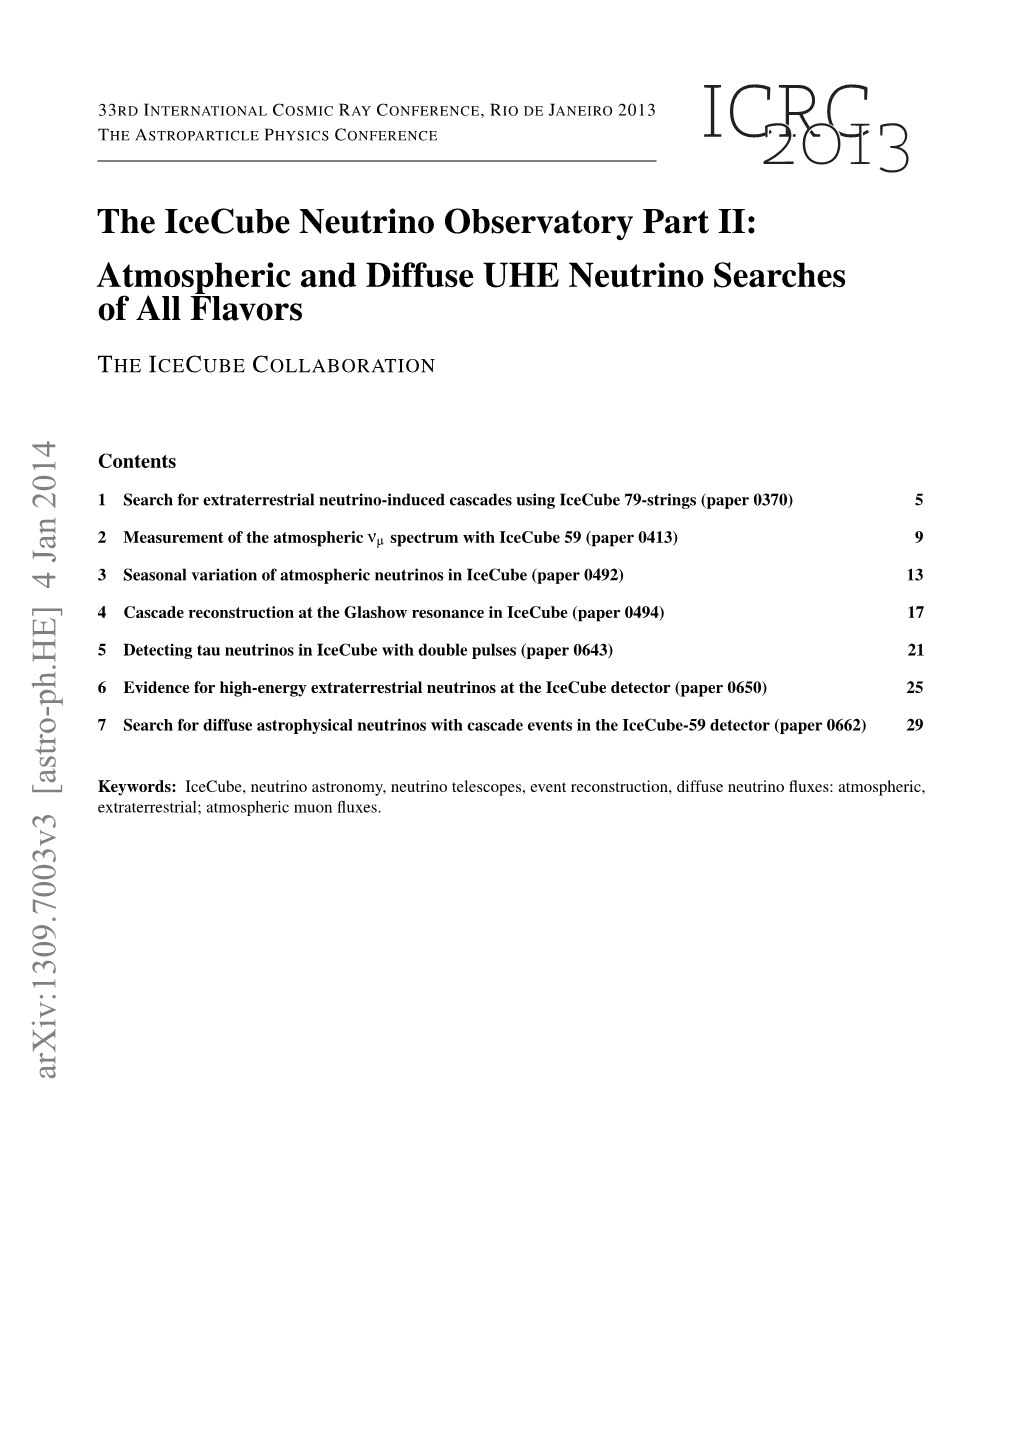 Atmospheric and Diffuse UHE Neutrino Searches of All Flavors